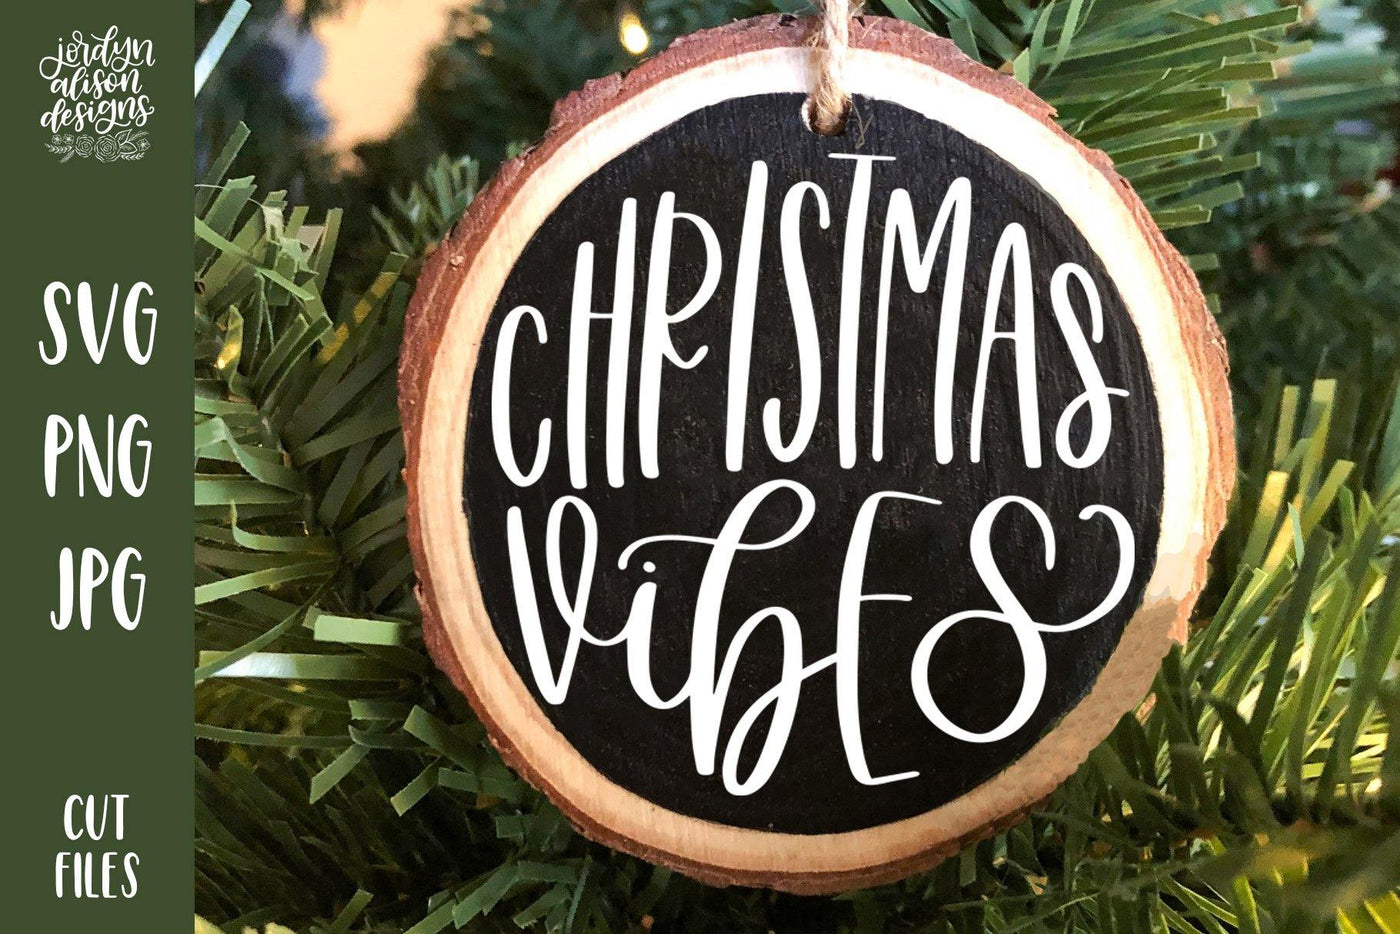 Handwritten text "Christmas Vibes" on Round Christmas Ornament. 